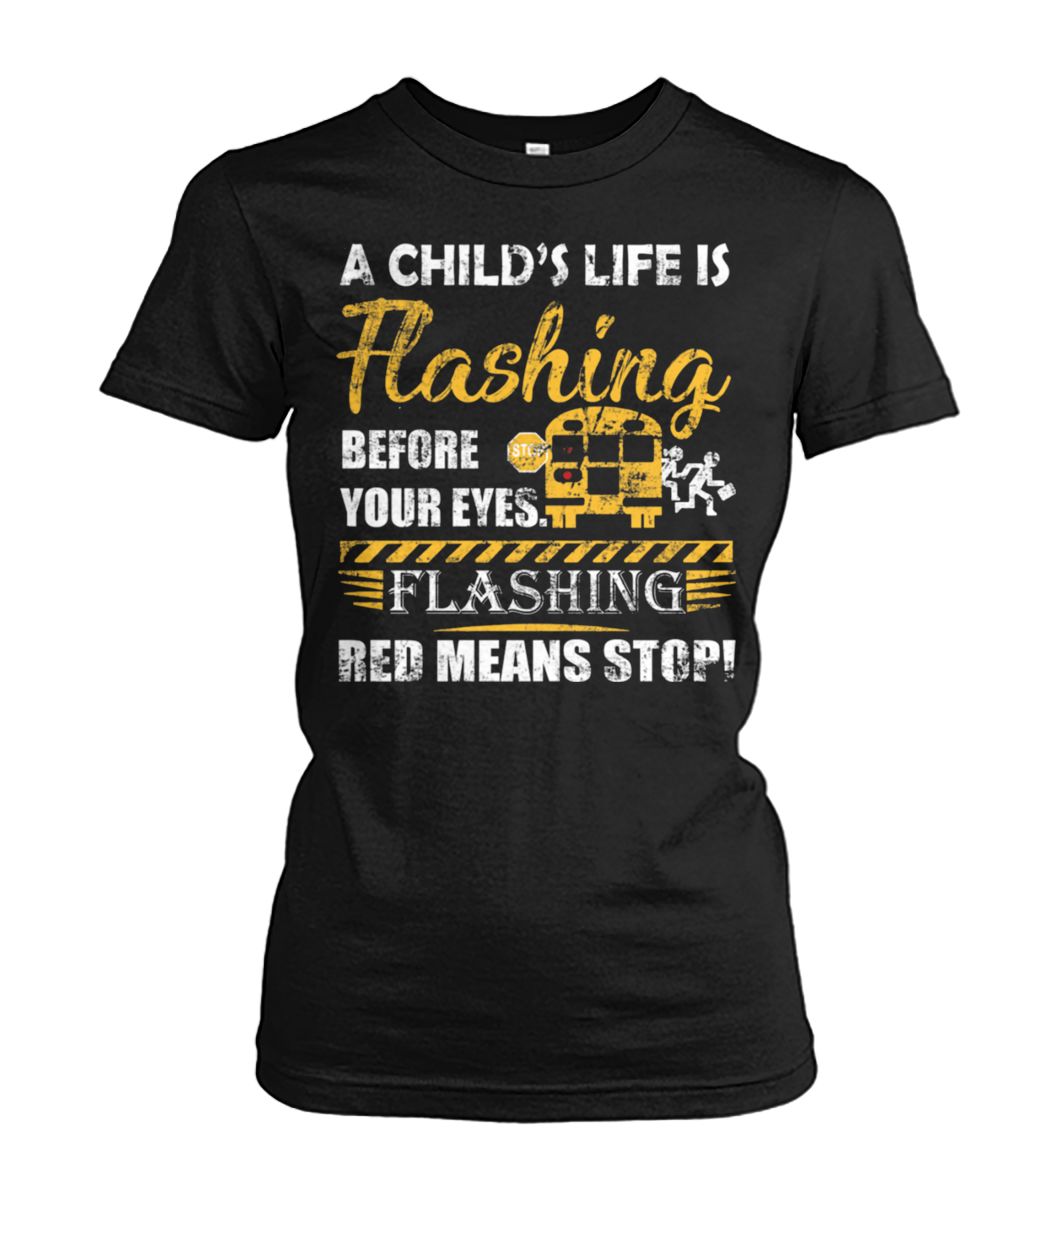 A child’s life is flashing before your eyes flashing red means stop women's crew tee